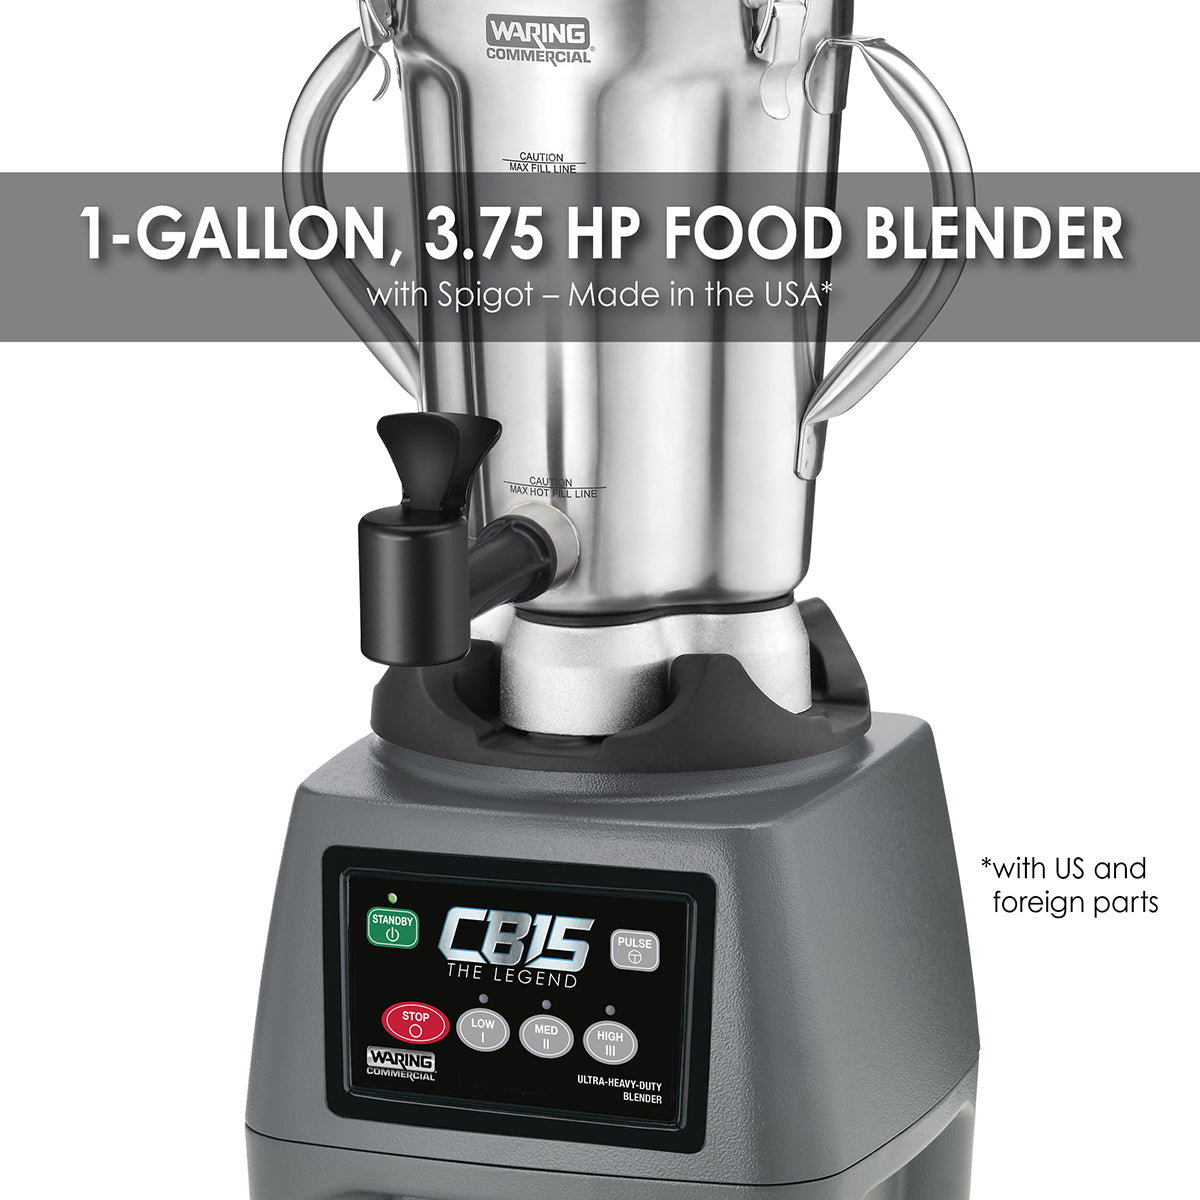 Waring ONE-GALLON 3.75 HP FOOD BLENDER WITH SPIGOT – MADE IN THE USA* Model: CB15SF